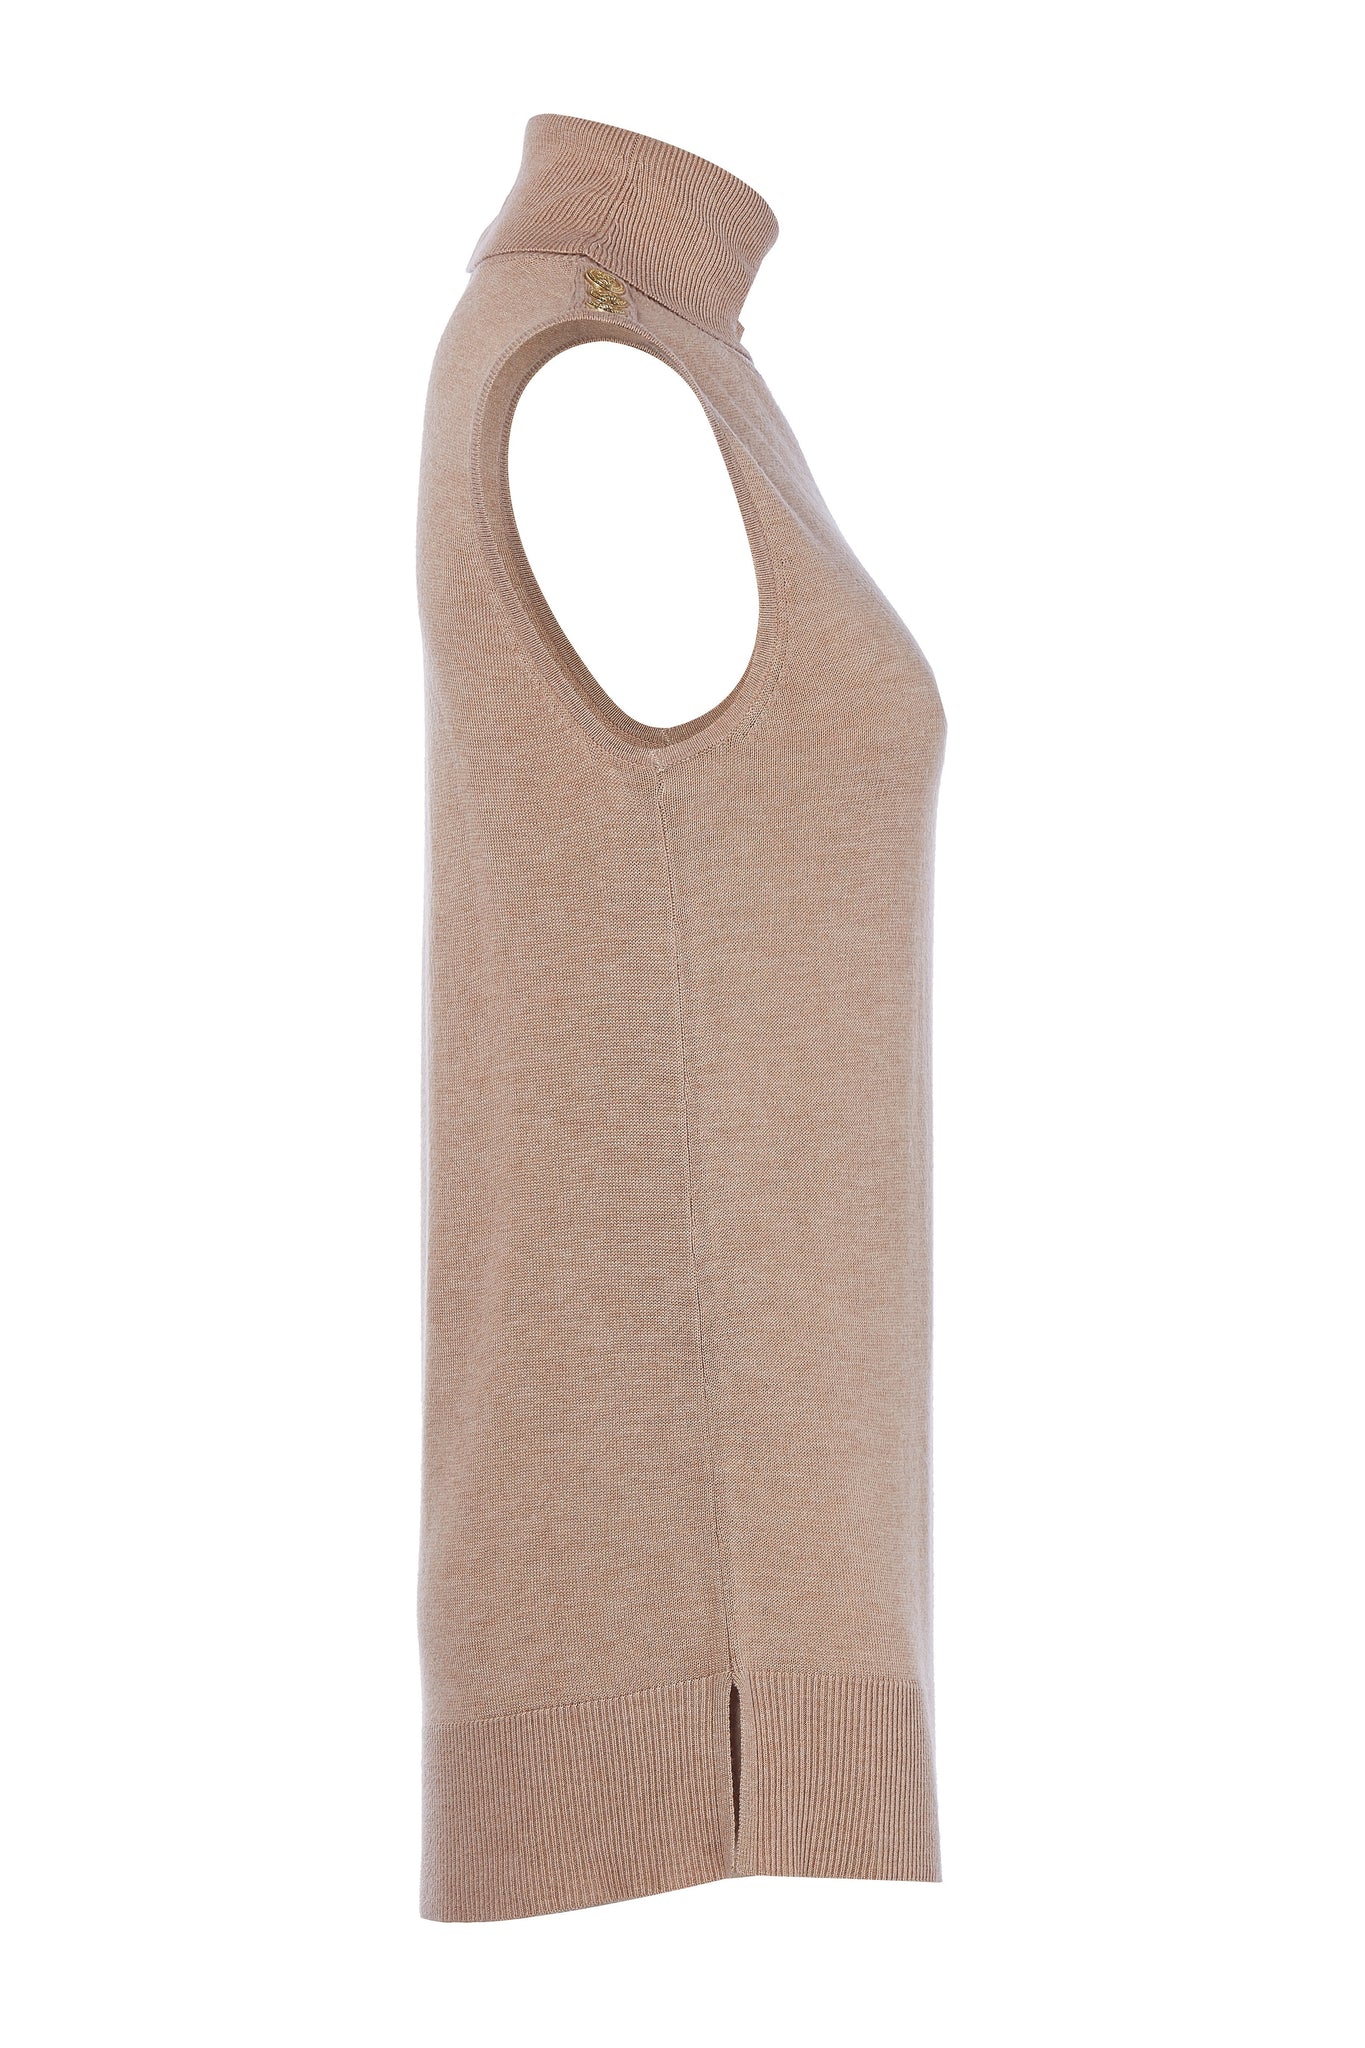 side of fitted lightweight sleeveless rollneck knit in camel with gold button detail across shoulders highlighting split hem